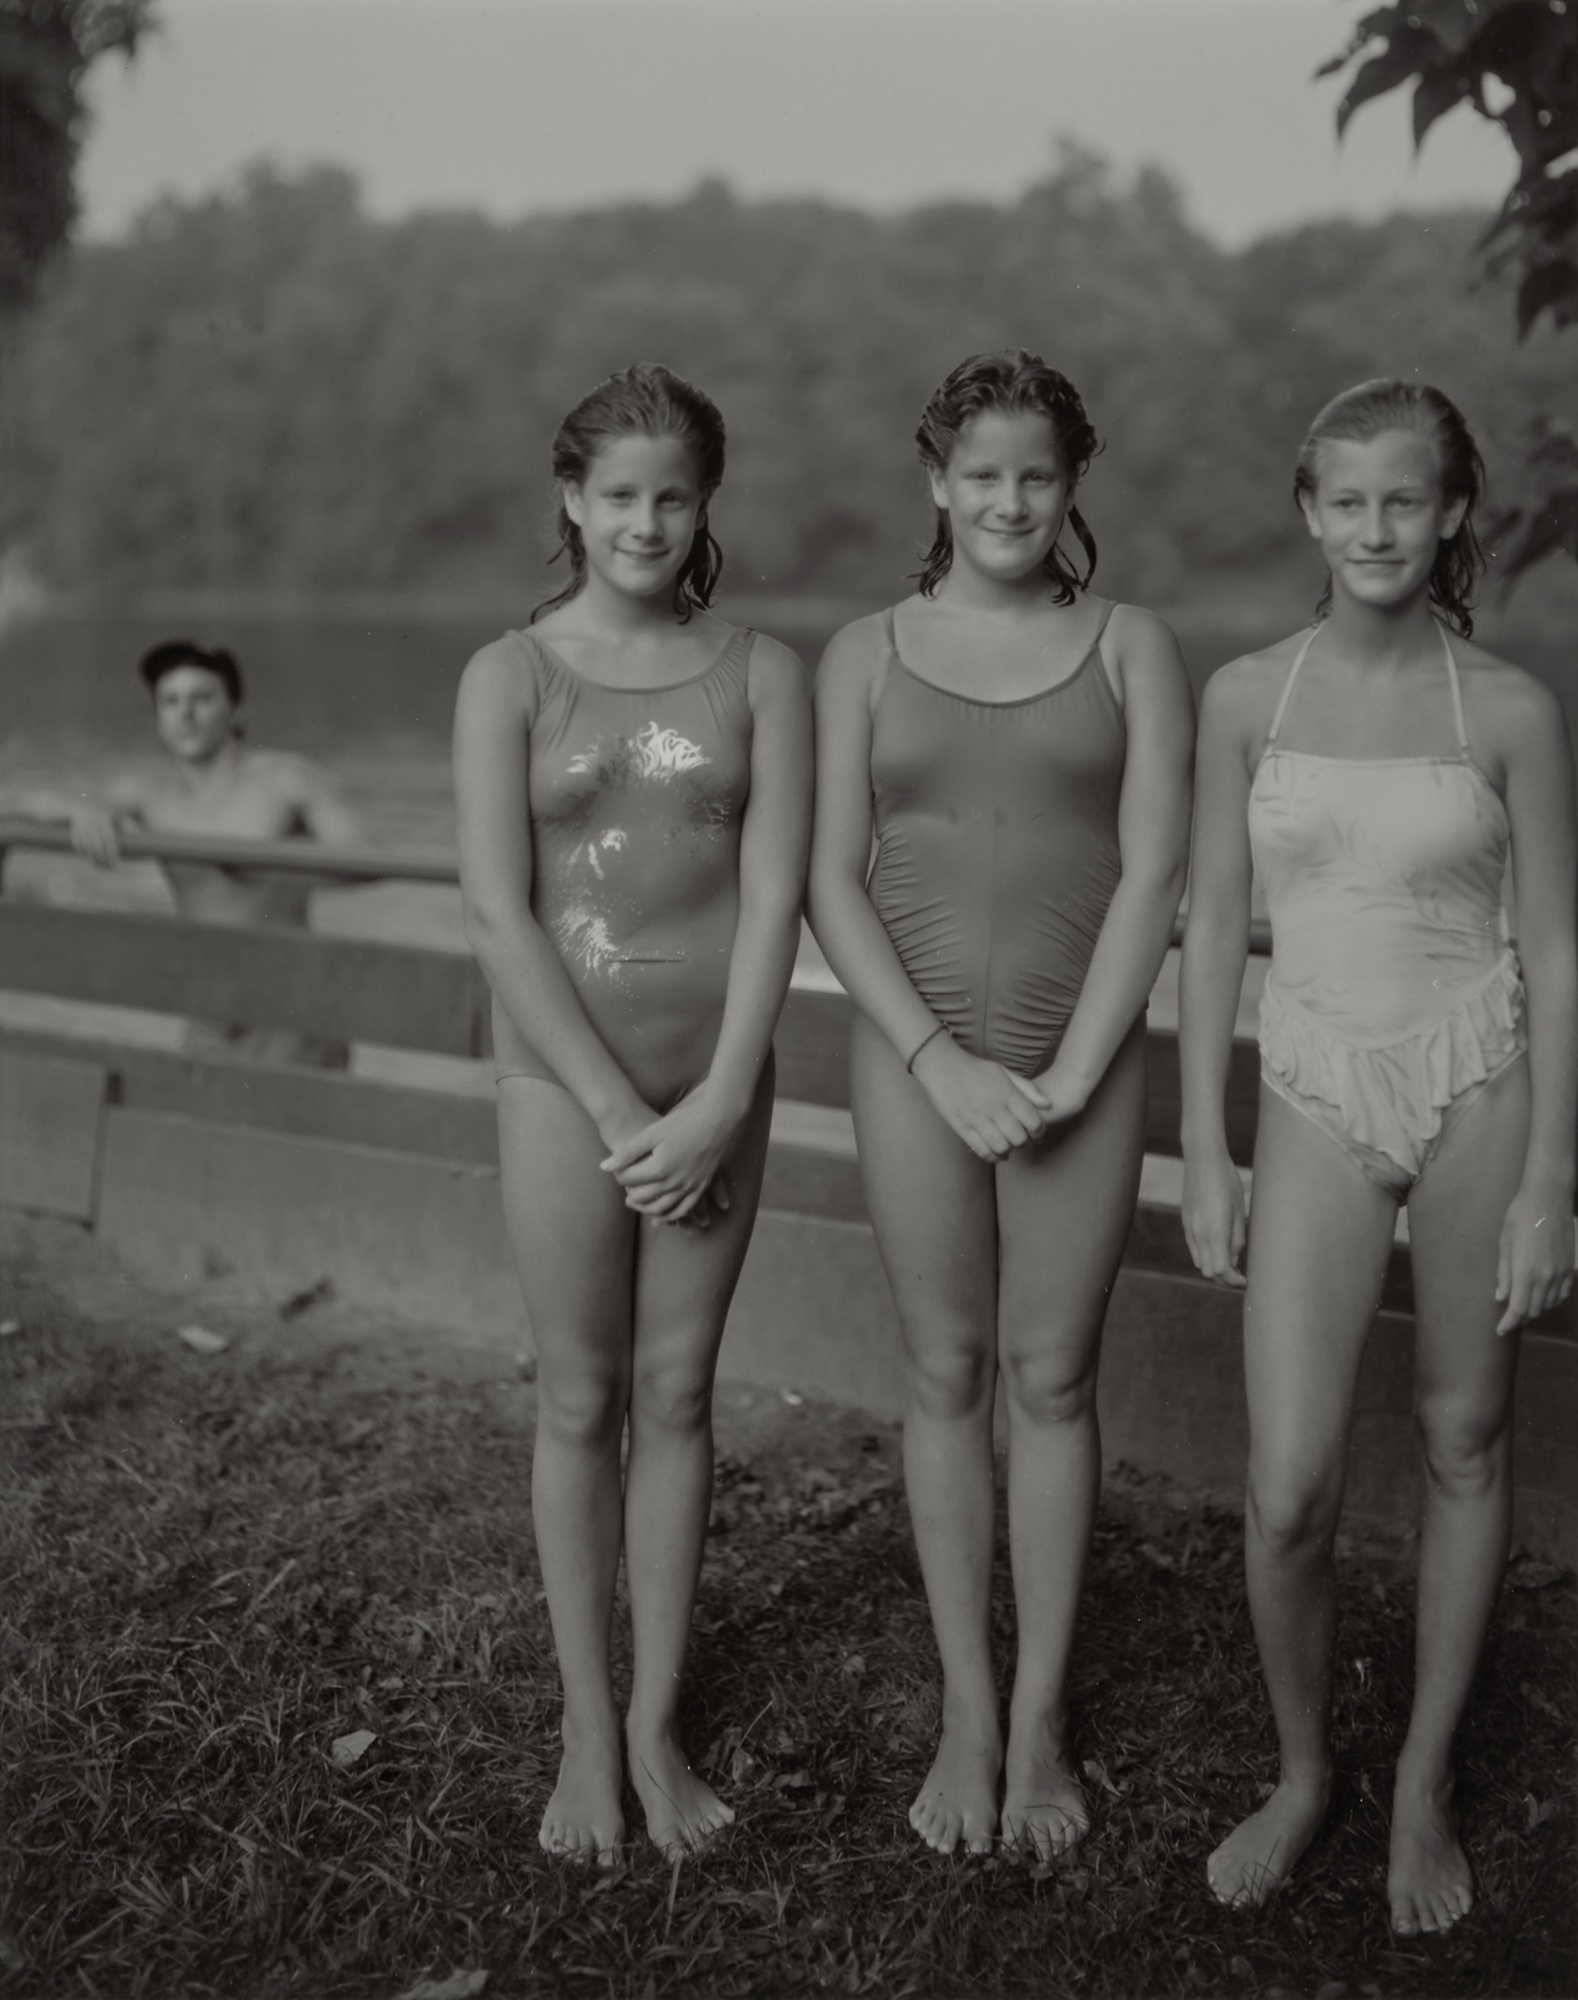 Untitled (from Easton Portraits)' (Three Girls in Bathing Suits - Judith Joy Ross